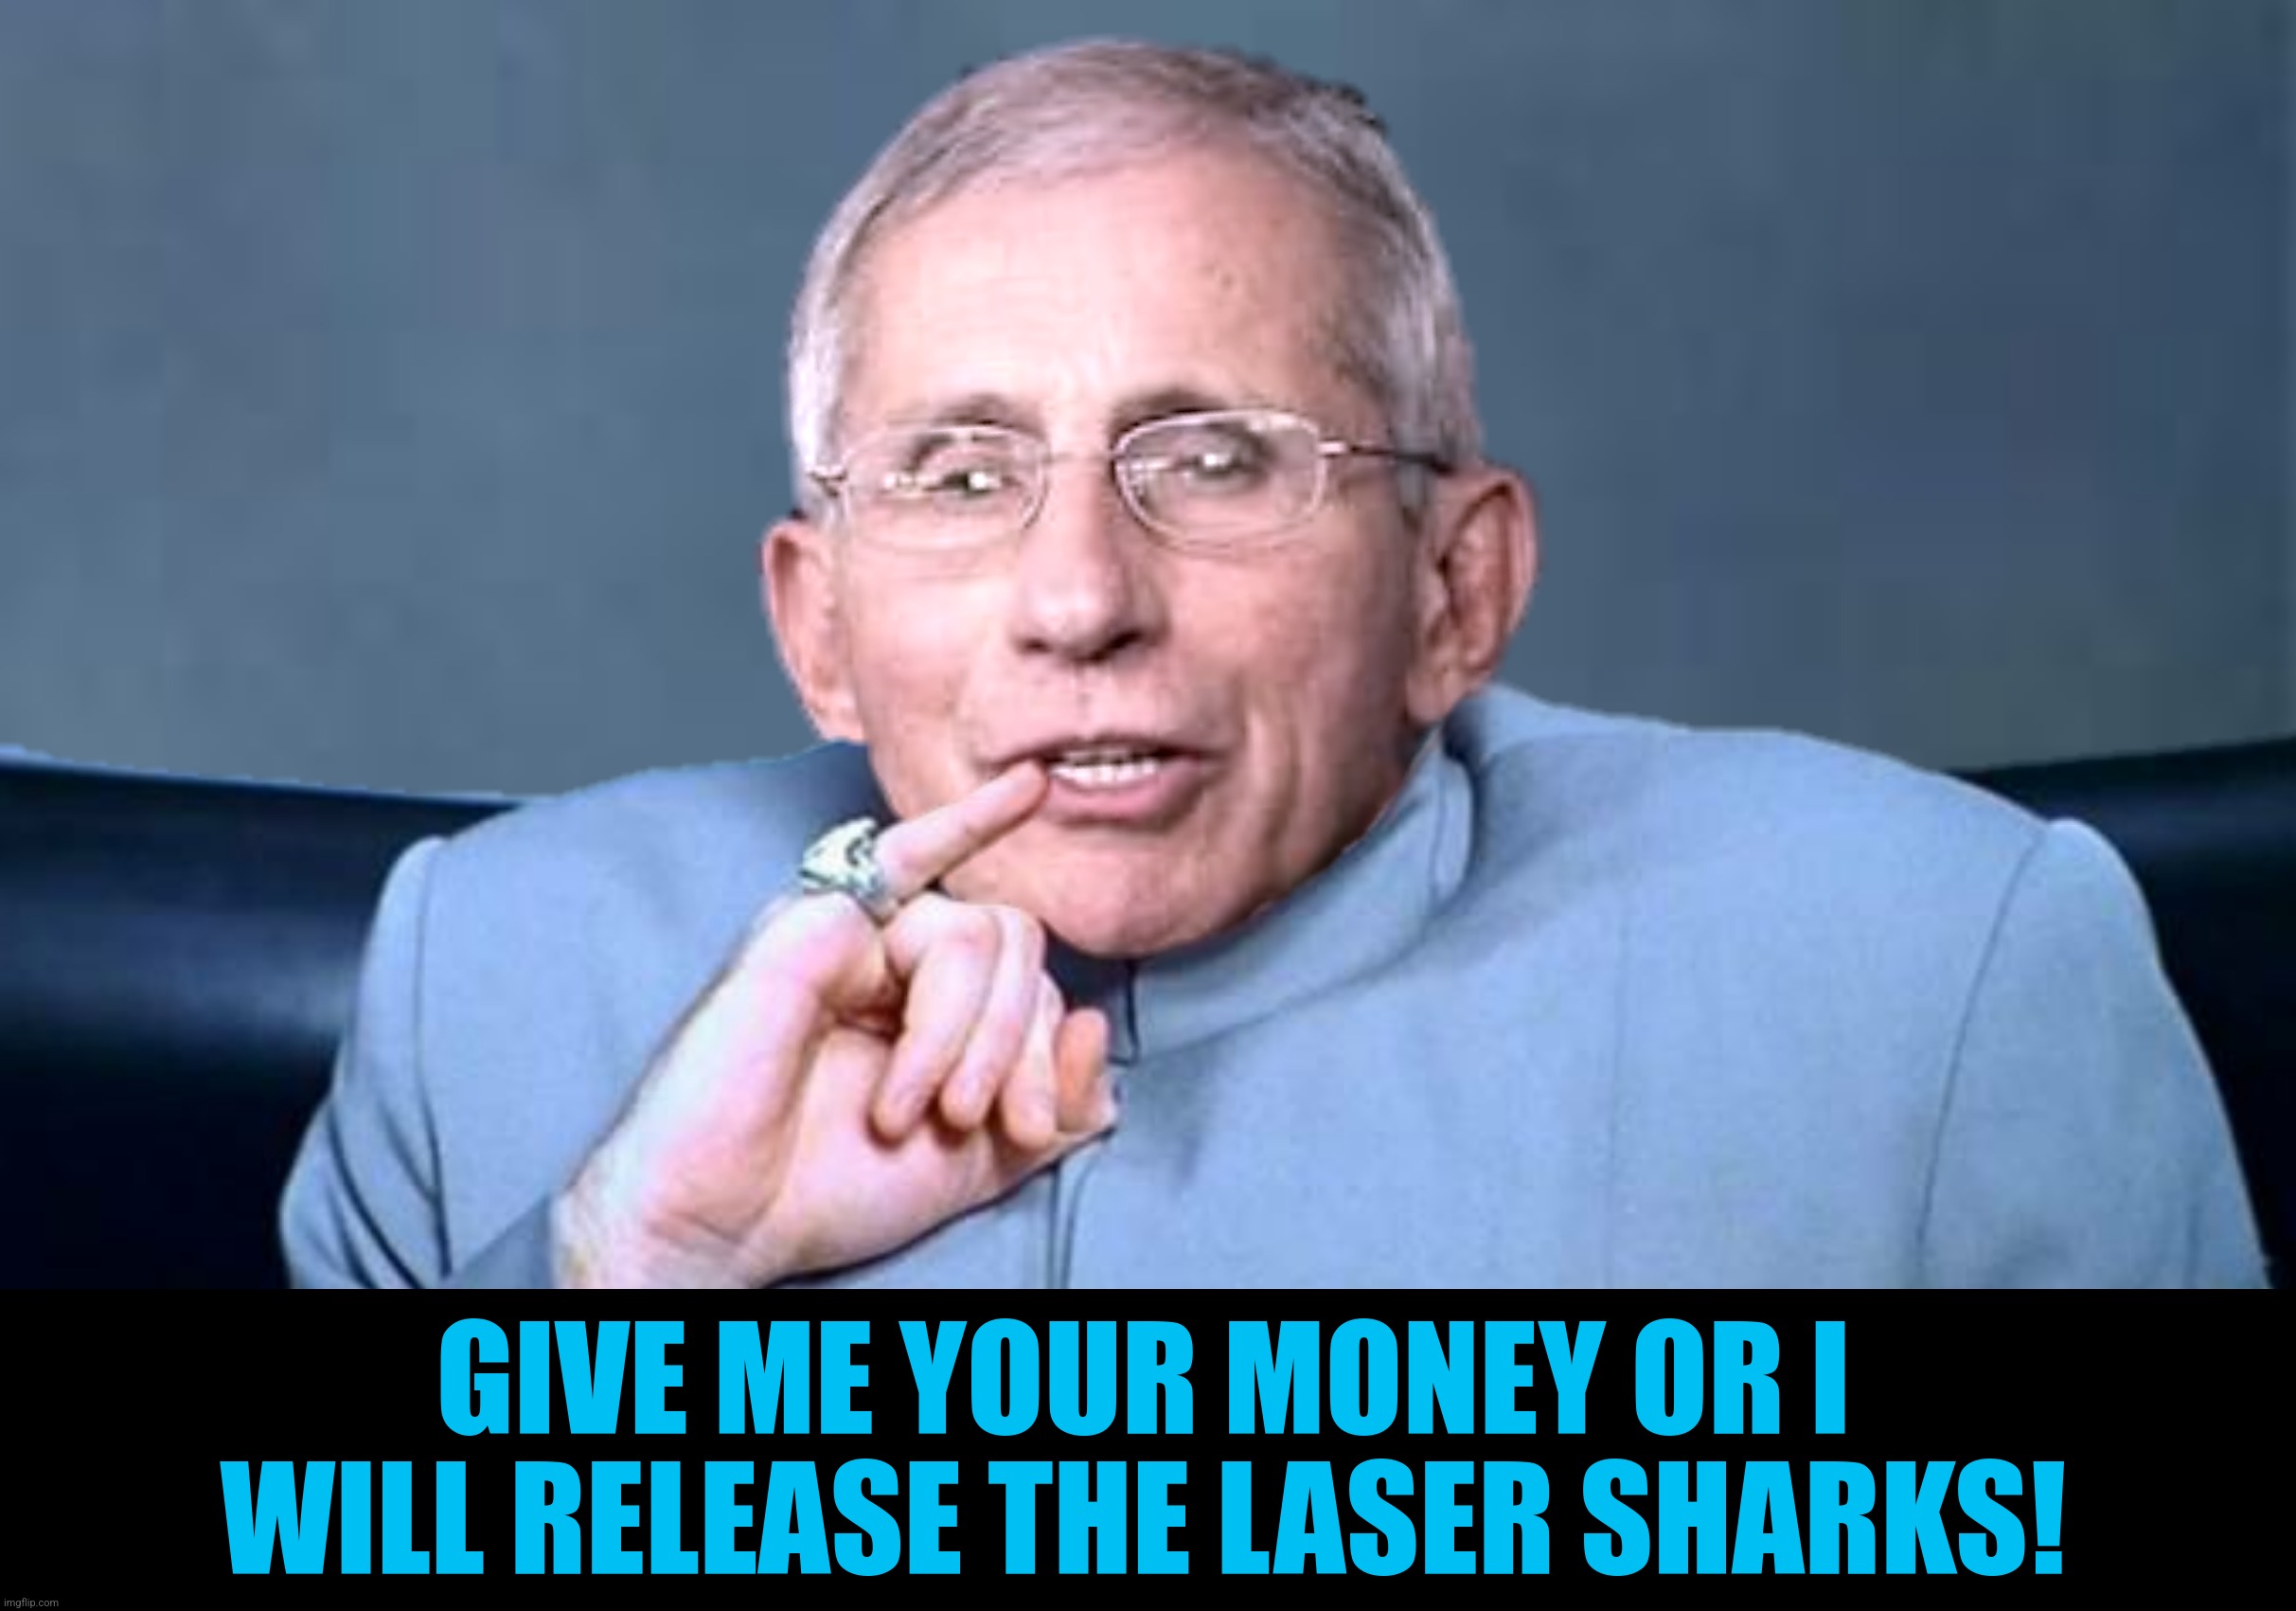 GIVE ME YOUR MONEY OR I WILL RELEASE THE LASER SHARKS! | made w/ Imgflip meme maker